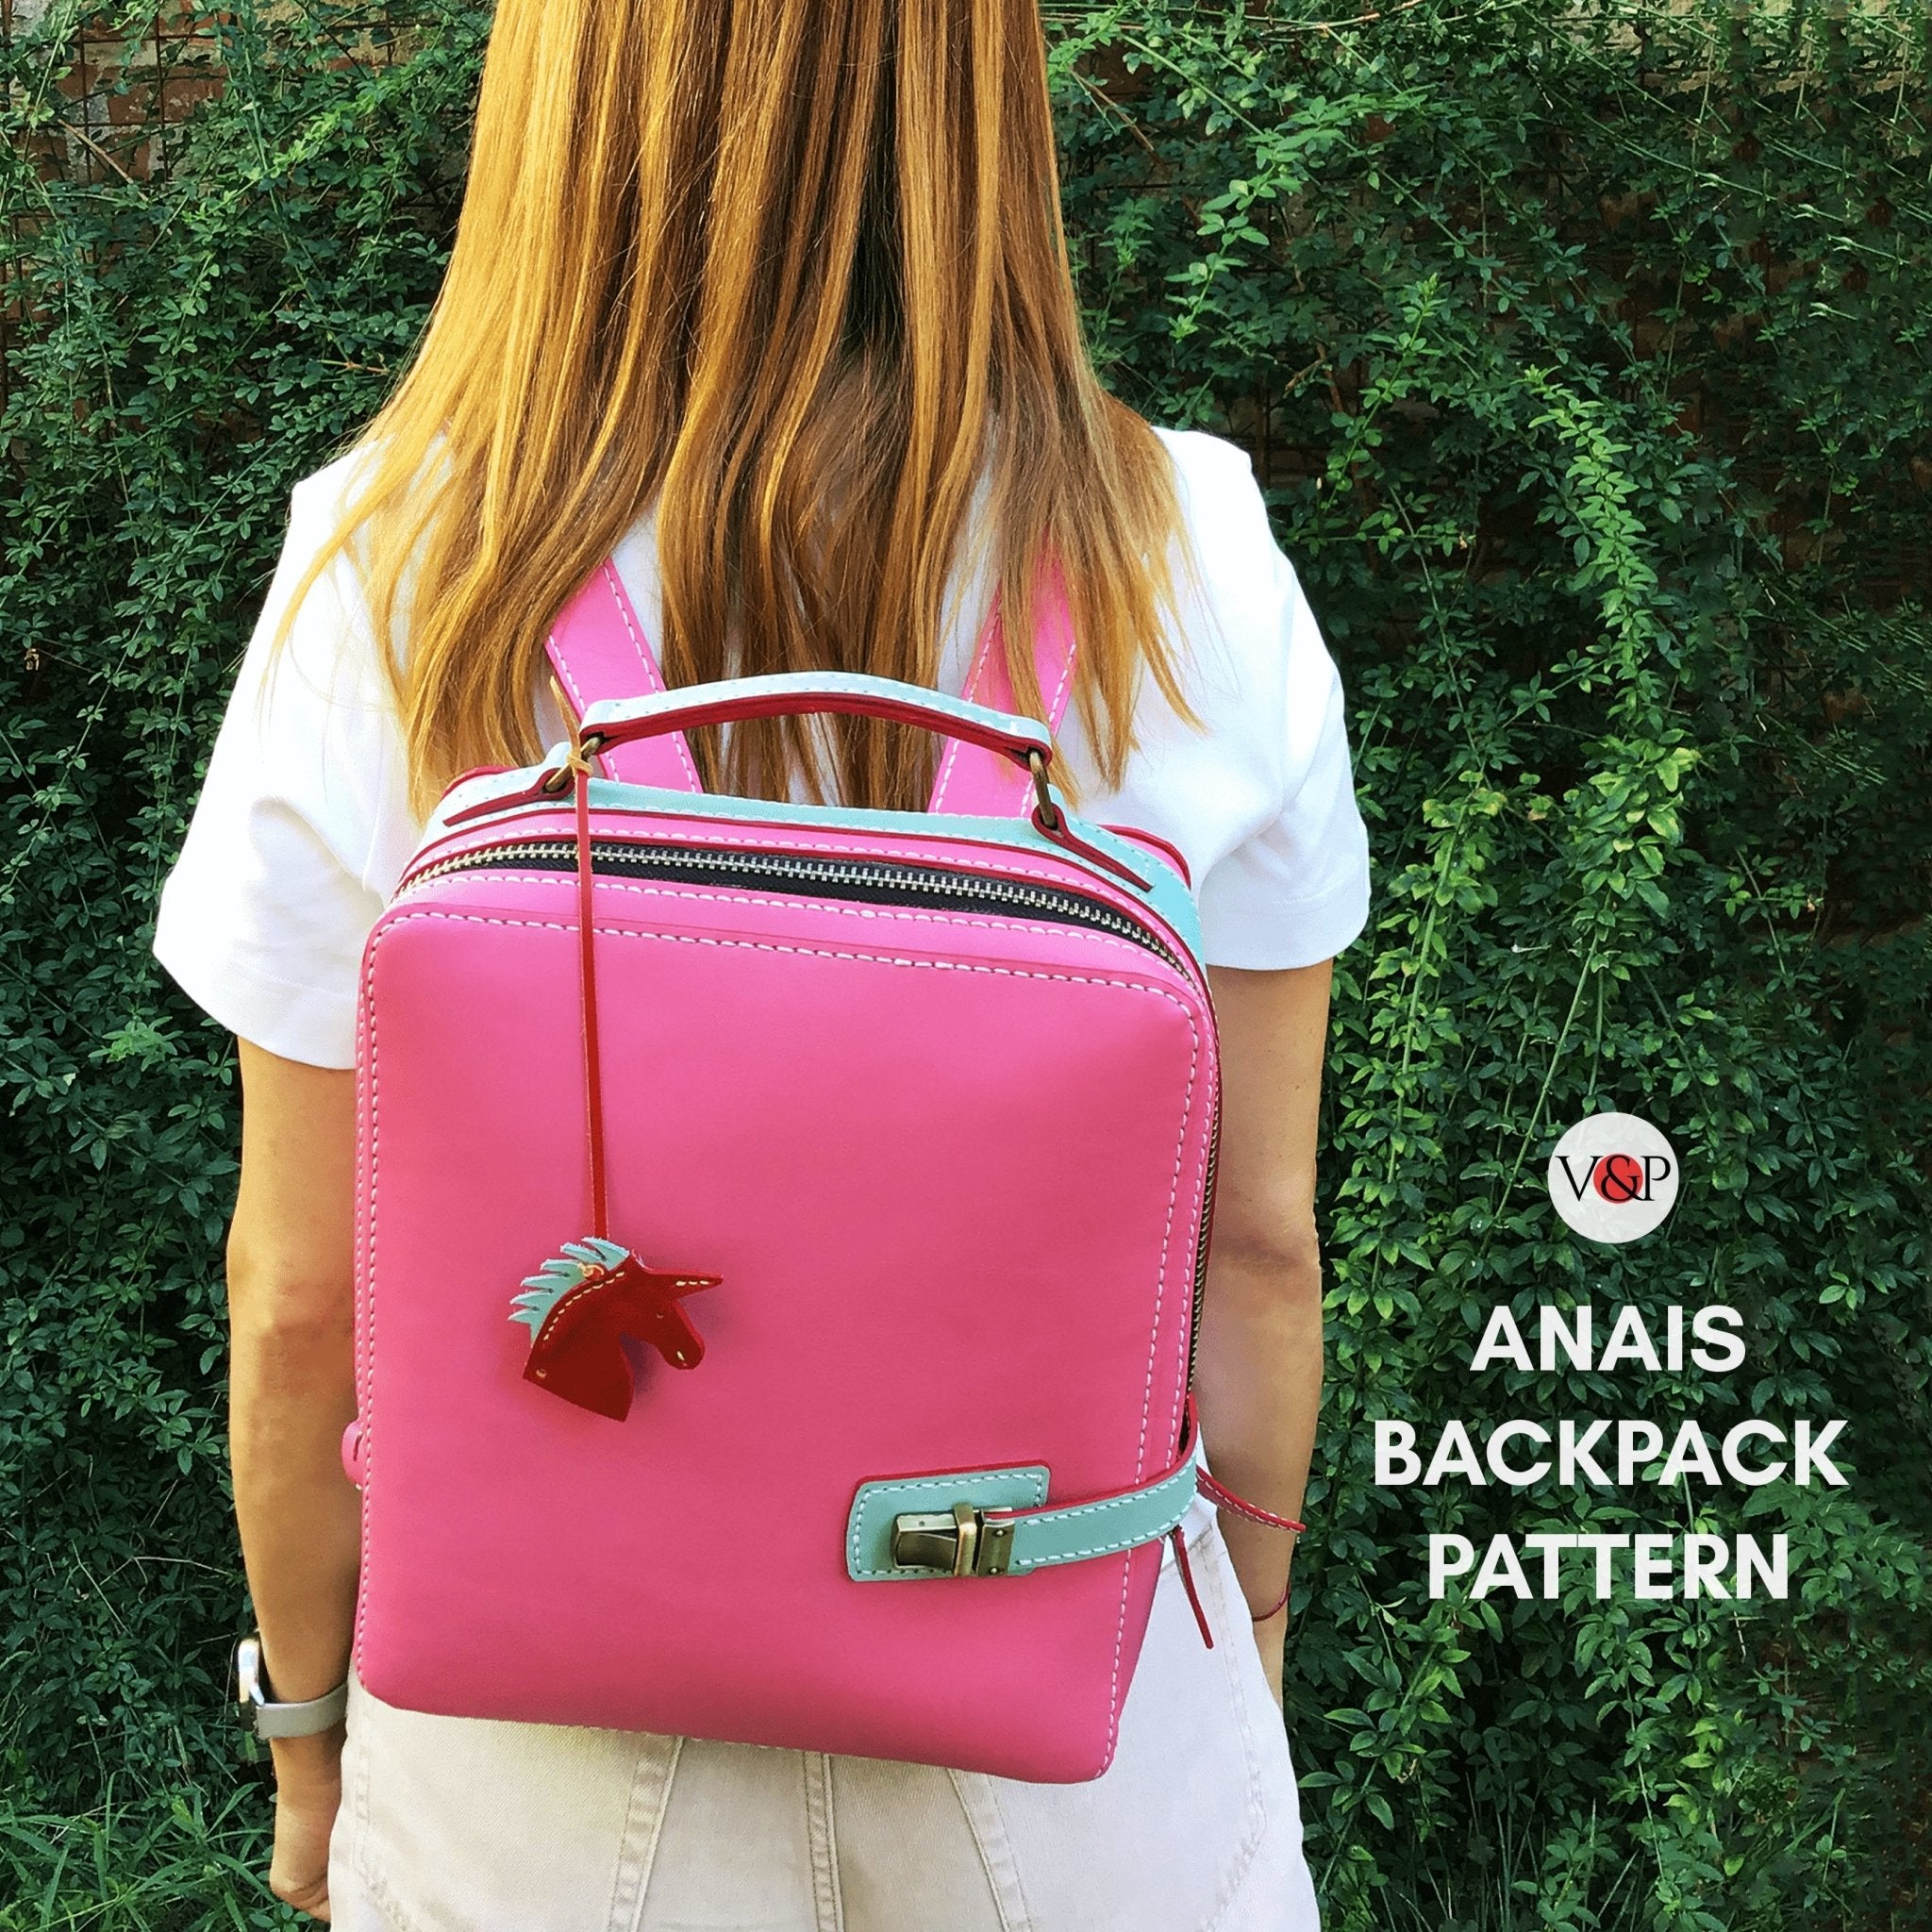 PDF Pattern Backpack Anais with Video Tutorial by Vasile and Pavel - Vasile and Pavel Leather Patterns